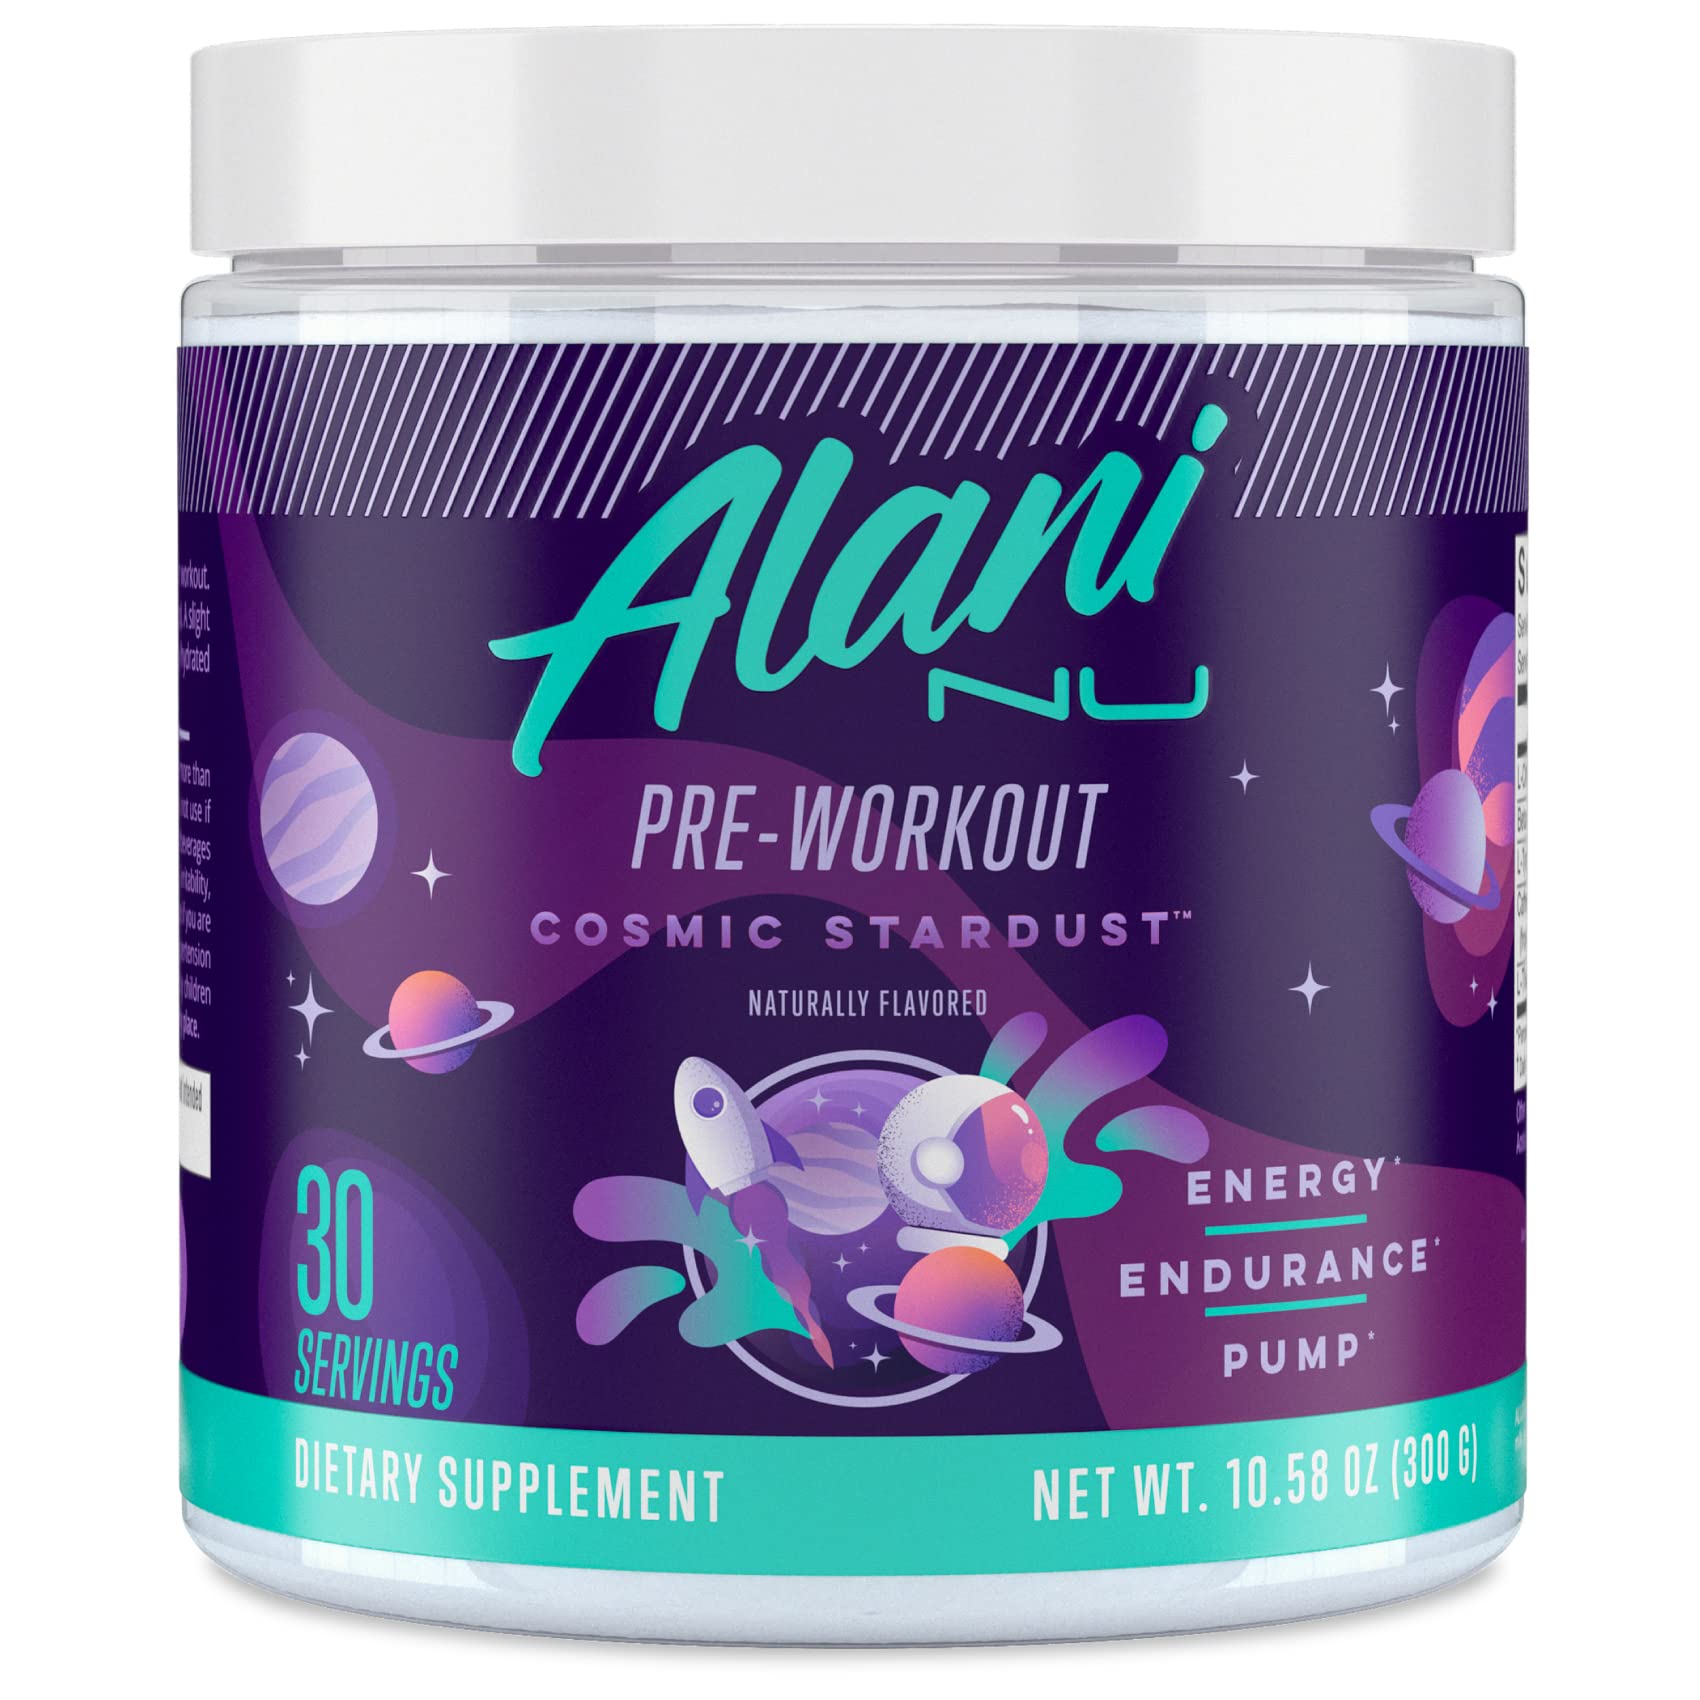 Alani Nu Creatine Monohydrate Powder and Pre Workout Cosmic Stardust Powder Bundle | Sugar Free | 30 Servings Per Container